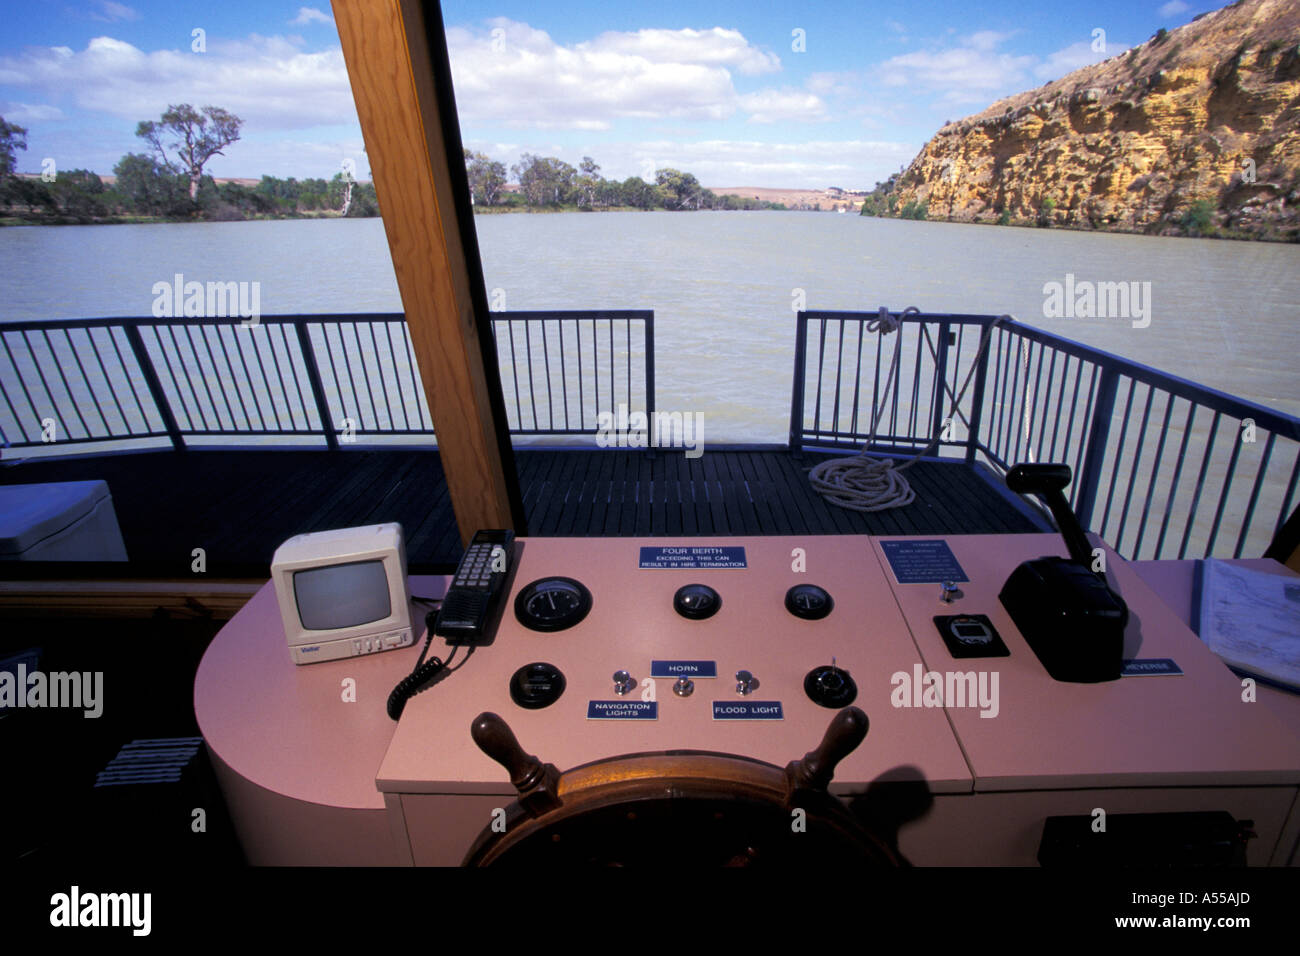 Rudder control panel of a house boat Murray River Australia Stock Photo